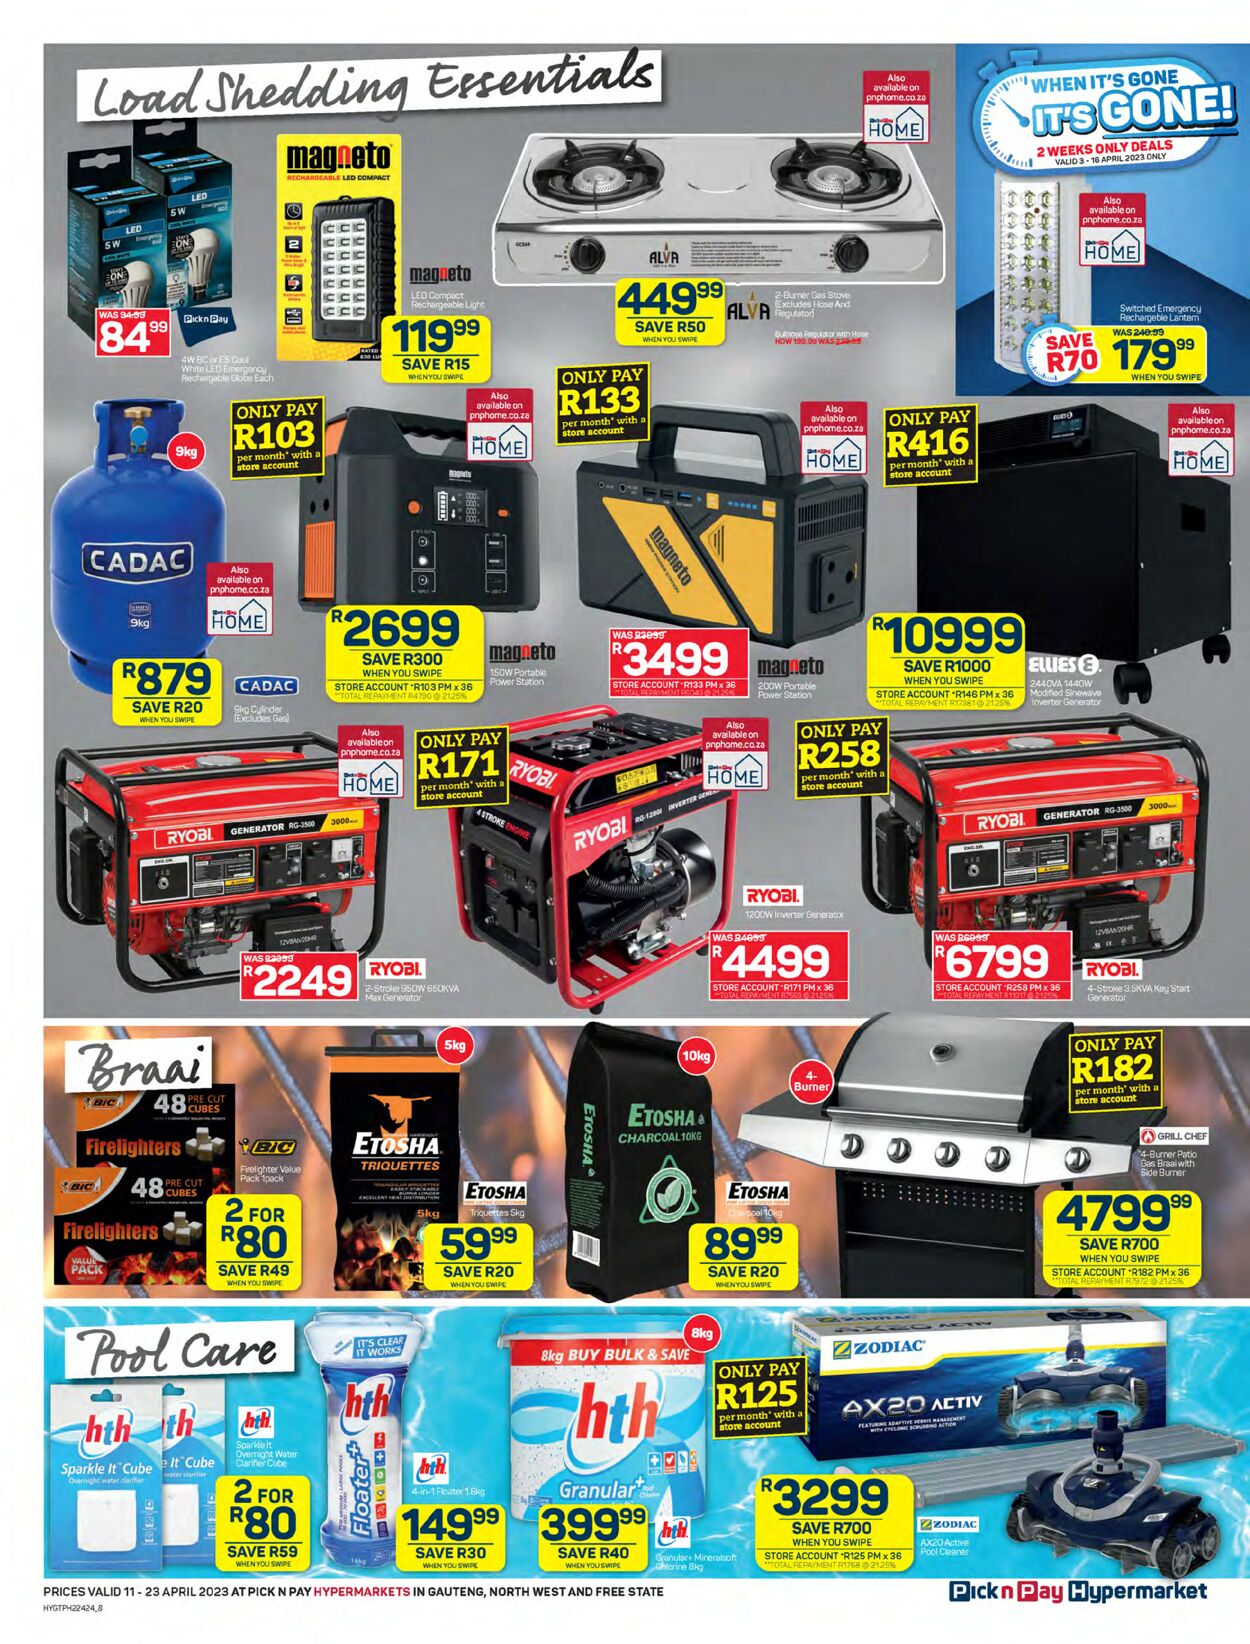 Pick n Pay Catalogue - 2023/04/11-2023/04/23 (Page 8)